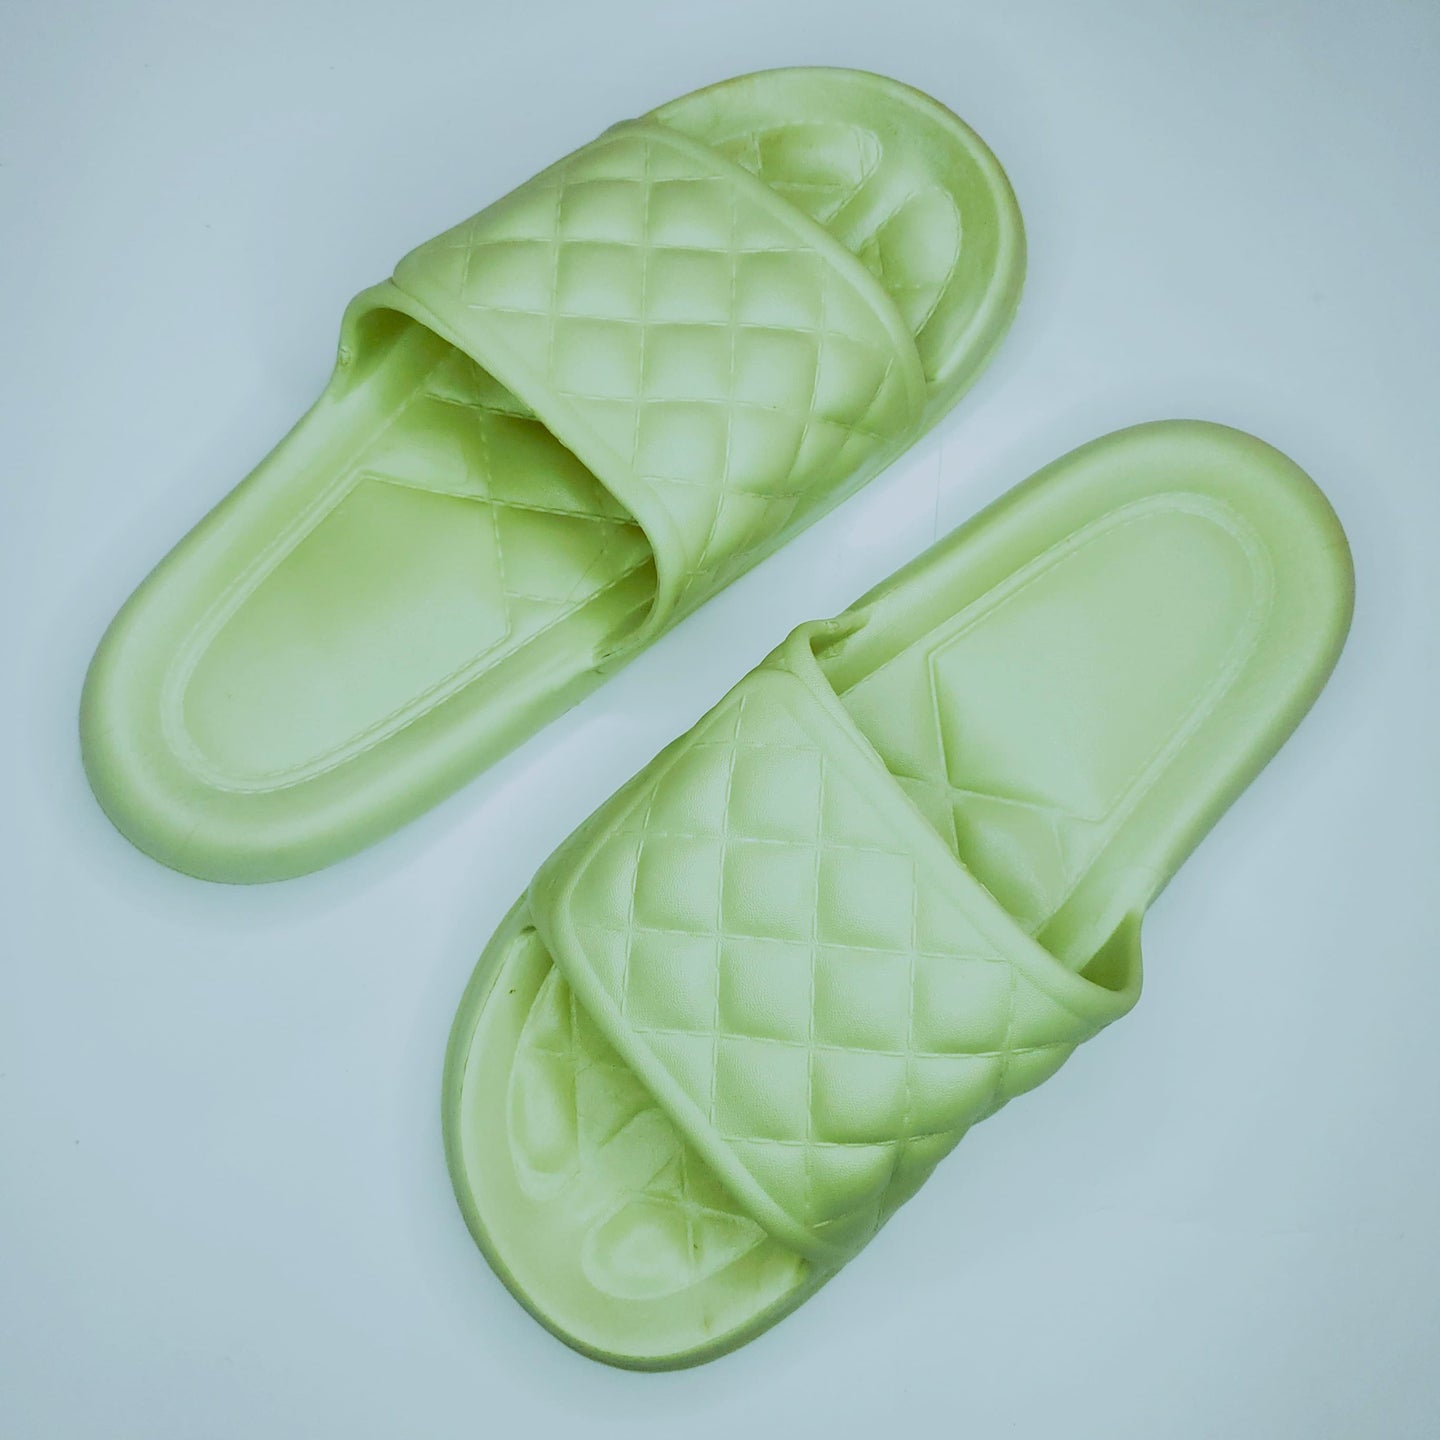 KB-Therapeutic Medicated Slippers